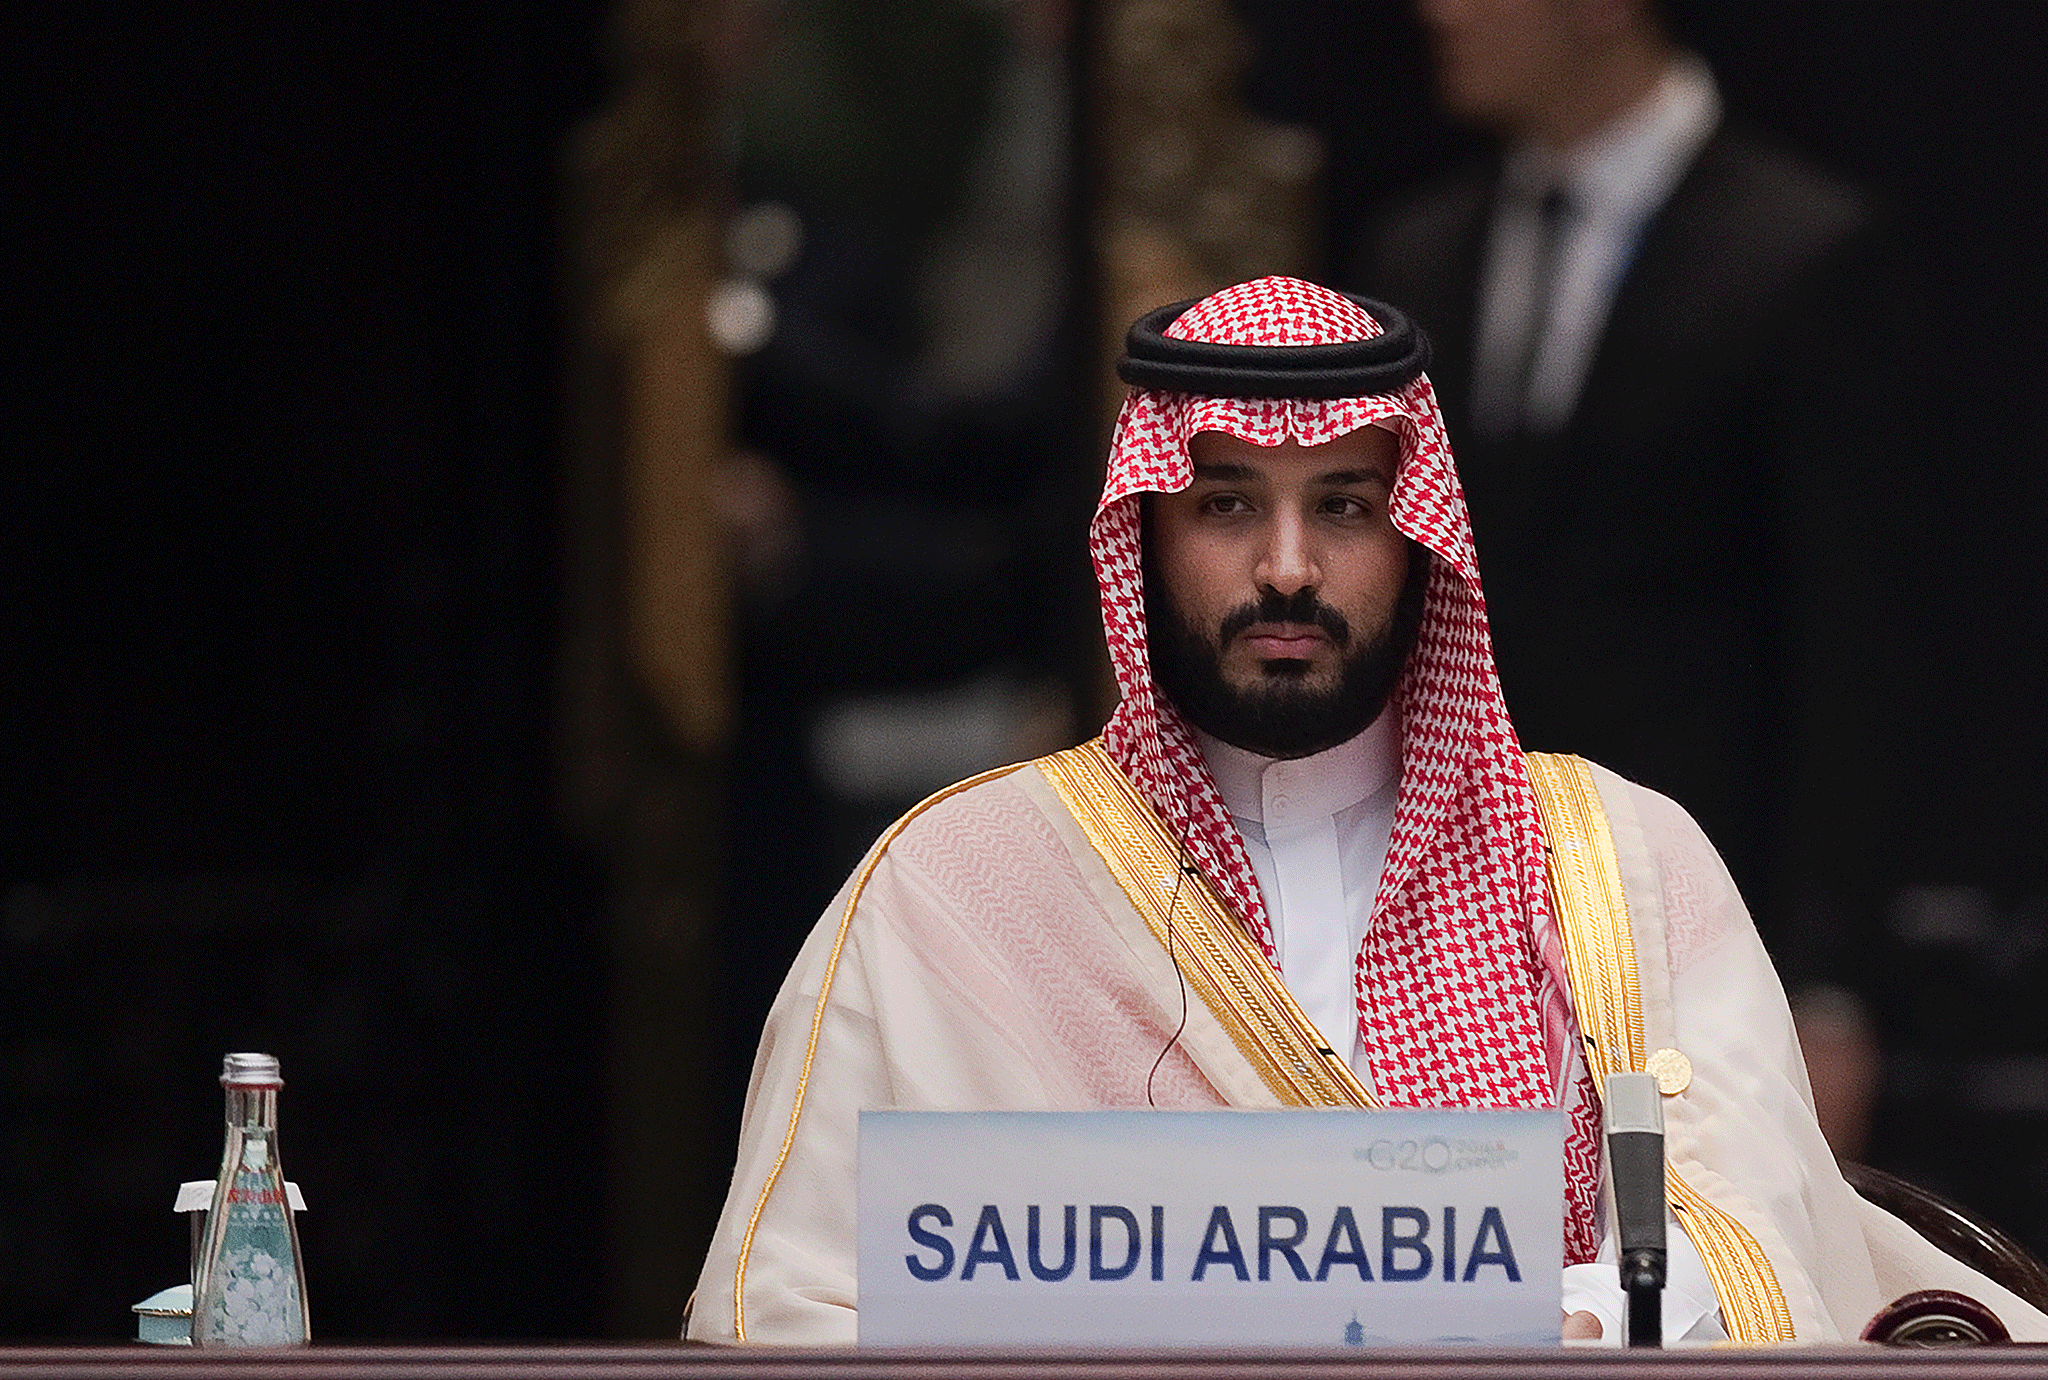 Saudi Arabia's dream of domination has gone up in flames